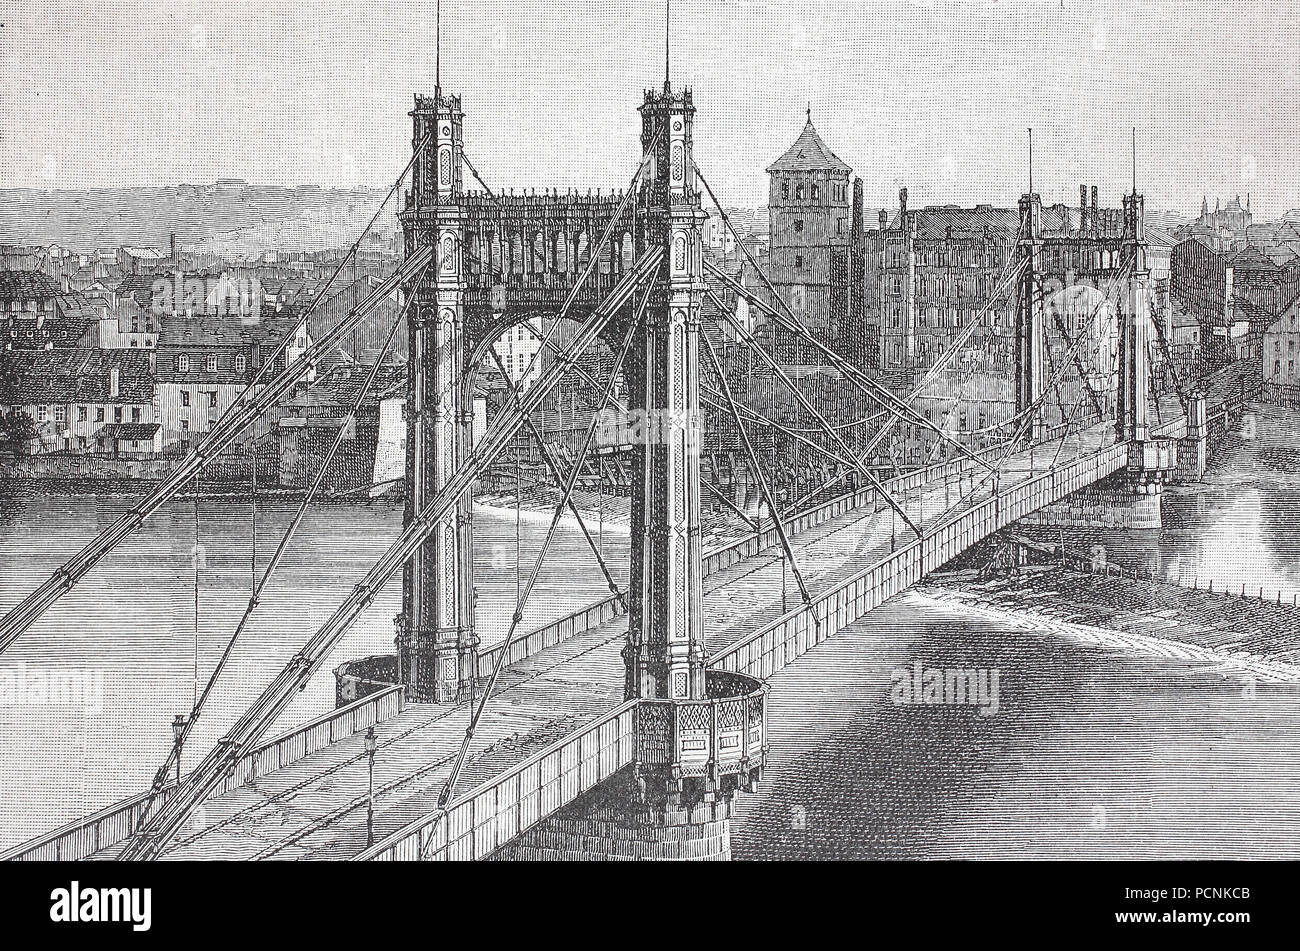 Franz Joseph Bridge, later renamed Stefanik Bridge, was a suspension bridge over the Vltava in Prague, opened in 1868, digital improved reproduction of an historical image from the year 1885 Stock Photo